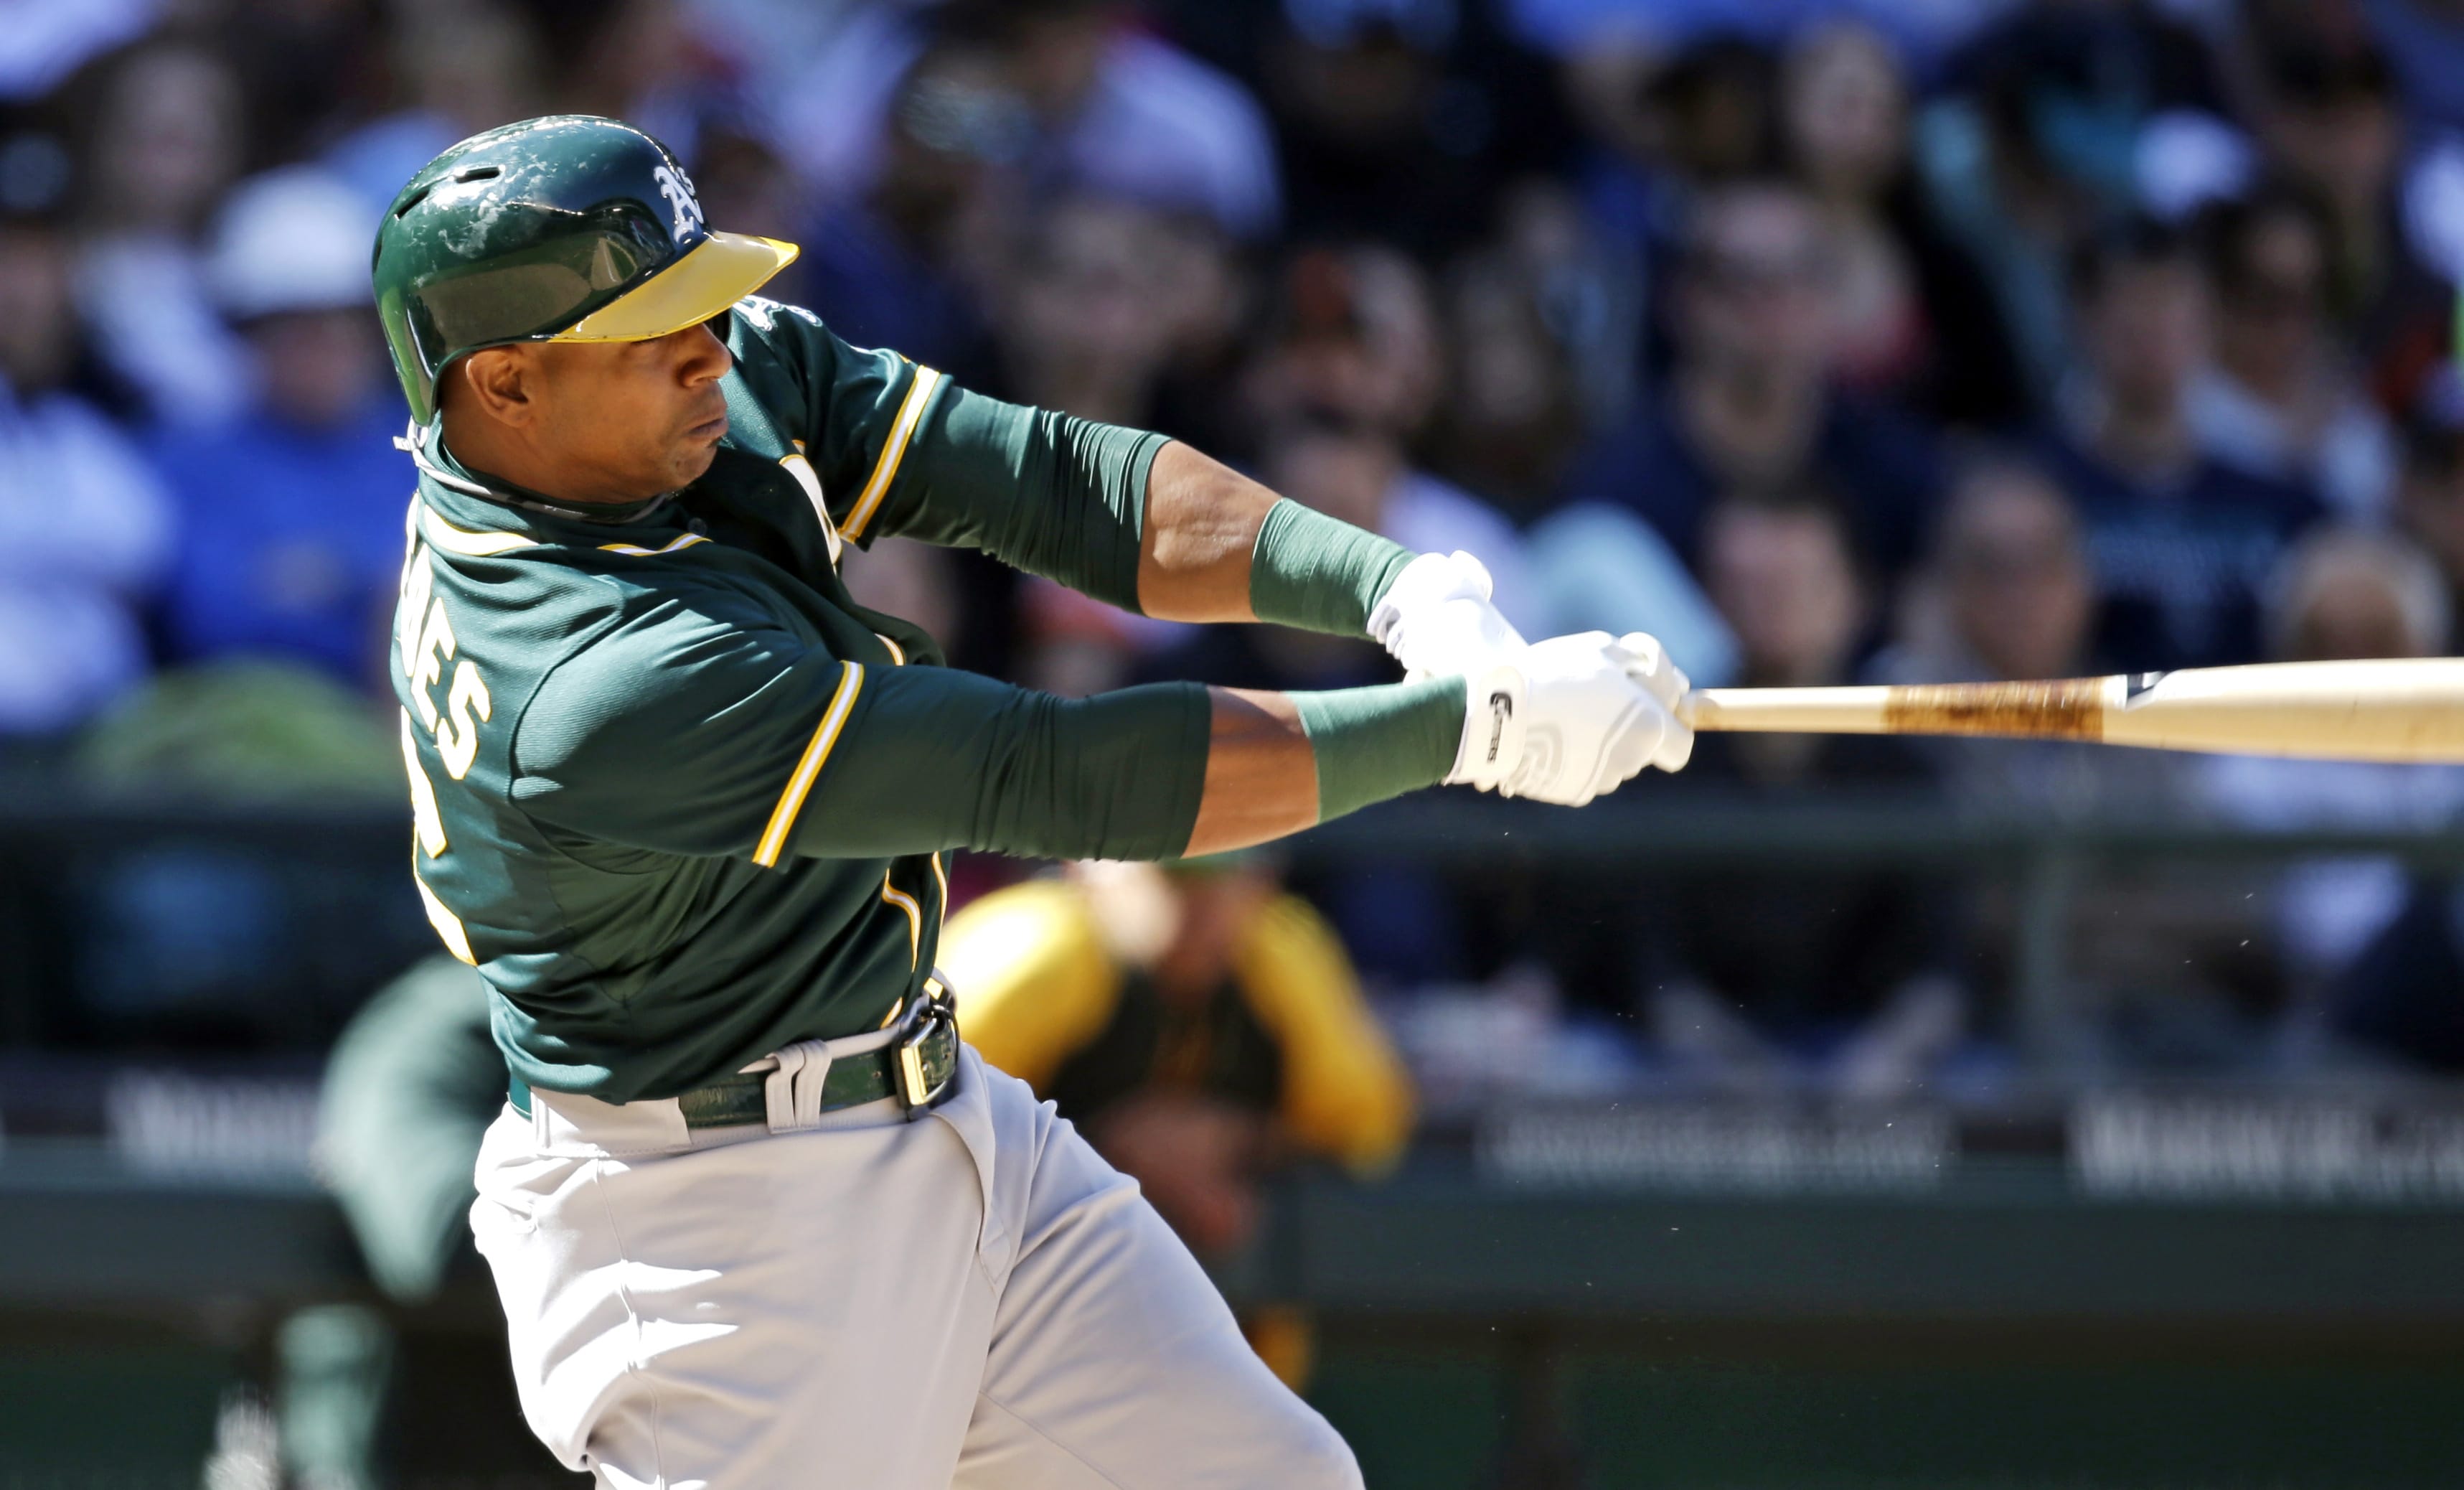 Oakland Athletics' Yoenis Cespedes hits a two-run home run against the Seattle Mariners in the eighth inning of a baseball game Sunday, April 13, 2014, in Seattle.